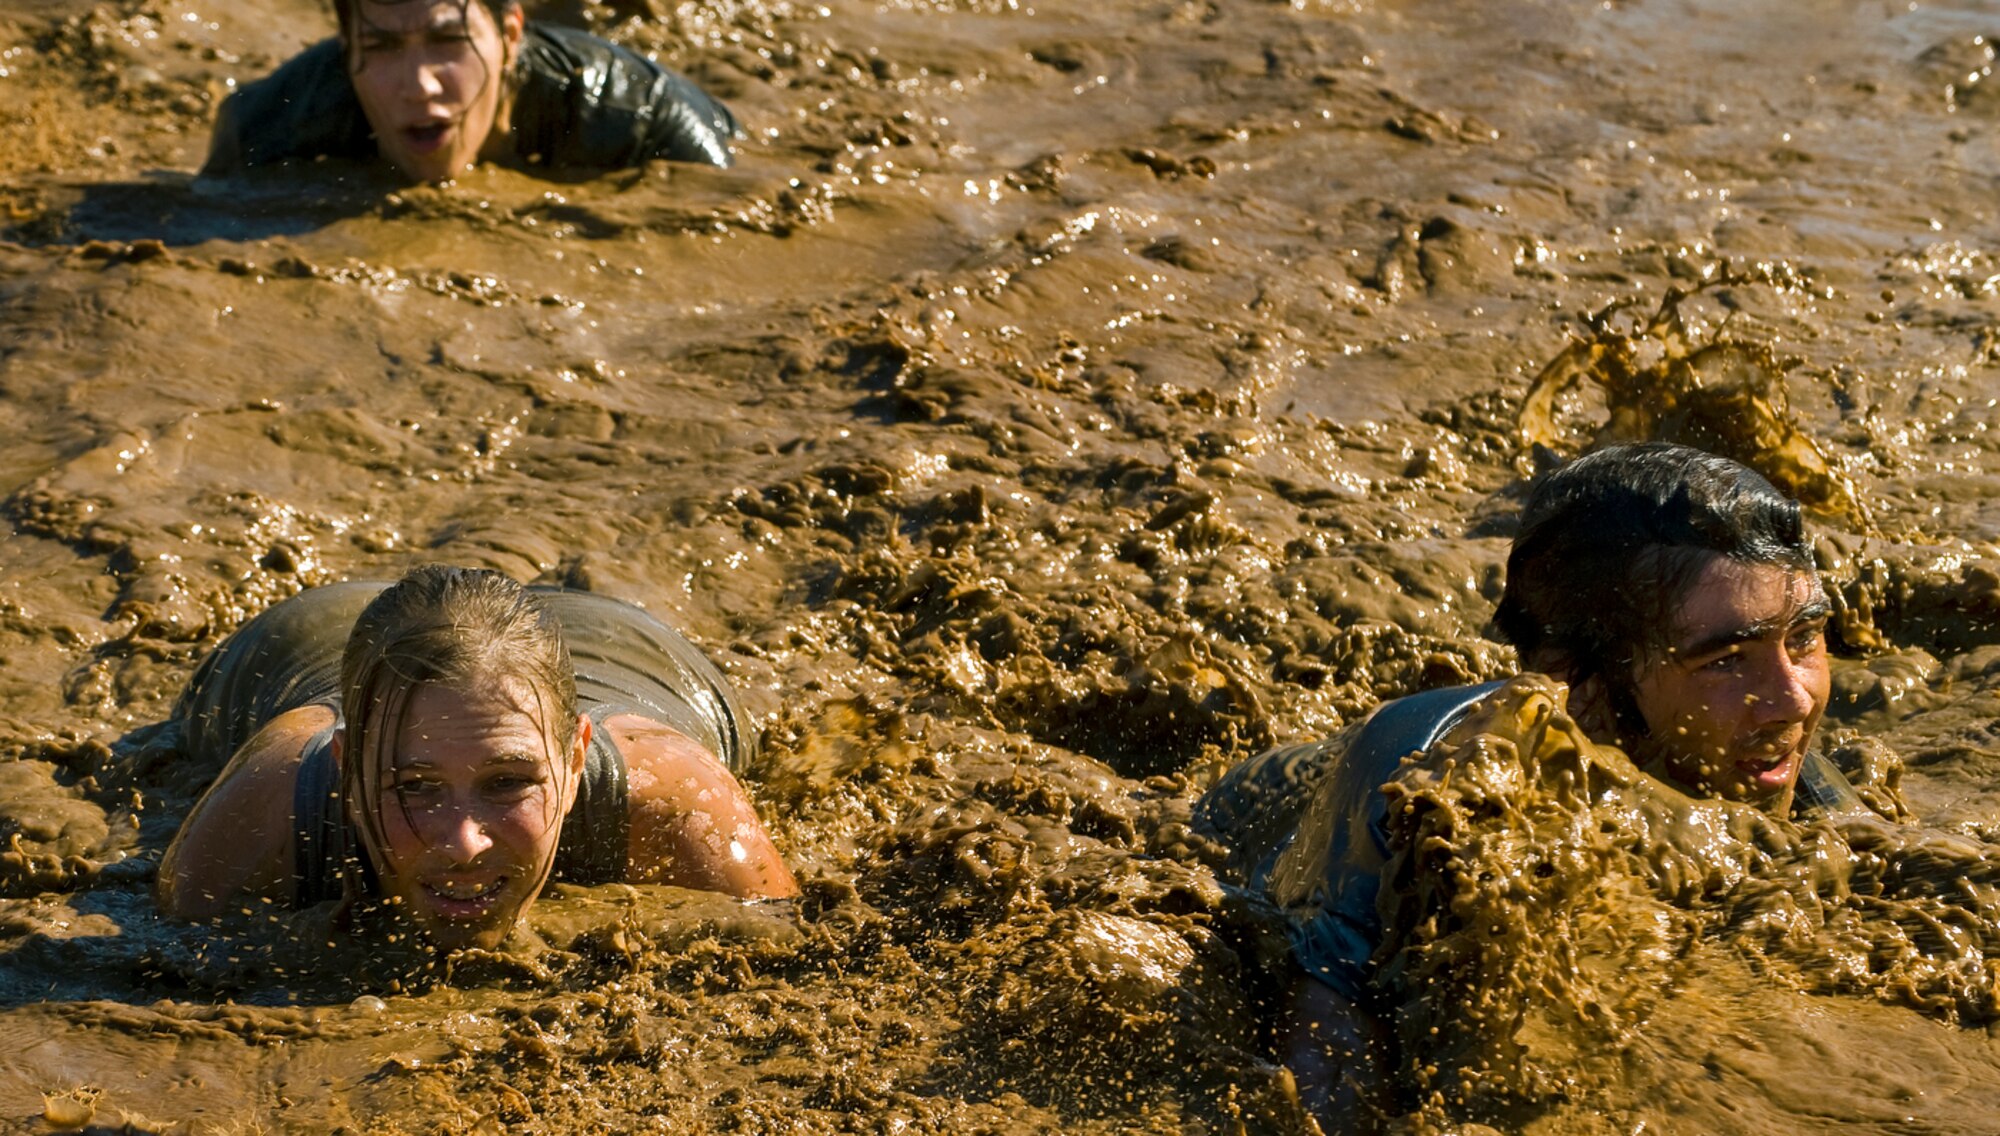 Local participants as well as members of the military and fire and police departments participate in the 10th Annual Mather Mud Run in Rancho Cordova, Calif., Sept. 5, 2009, for Air Force Week Sacramento. Air Force Week Sacramento is an event using various activities and exhibitions to educate the local community about the Air Force's capabilities and missions. (U.S. Air Force photo/Staff Sgt. Bennie J. Davis III)